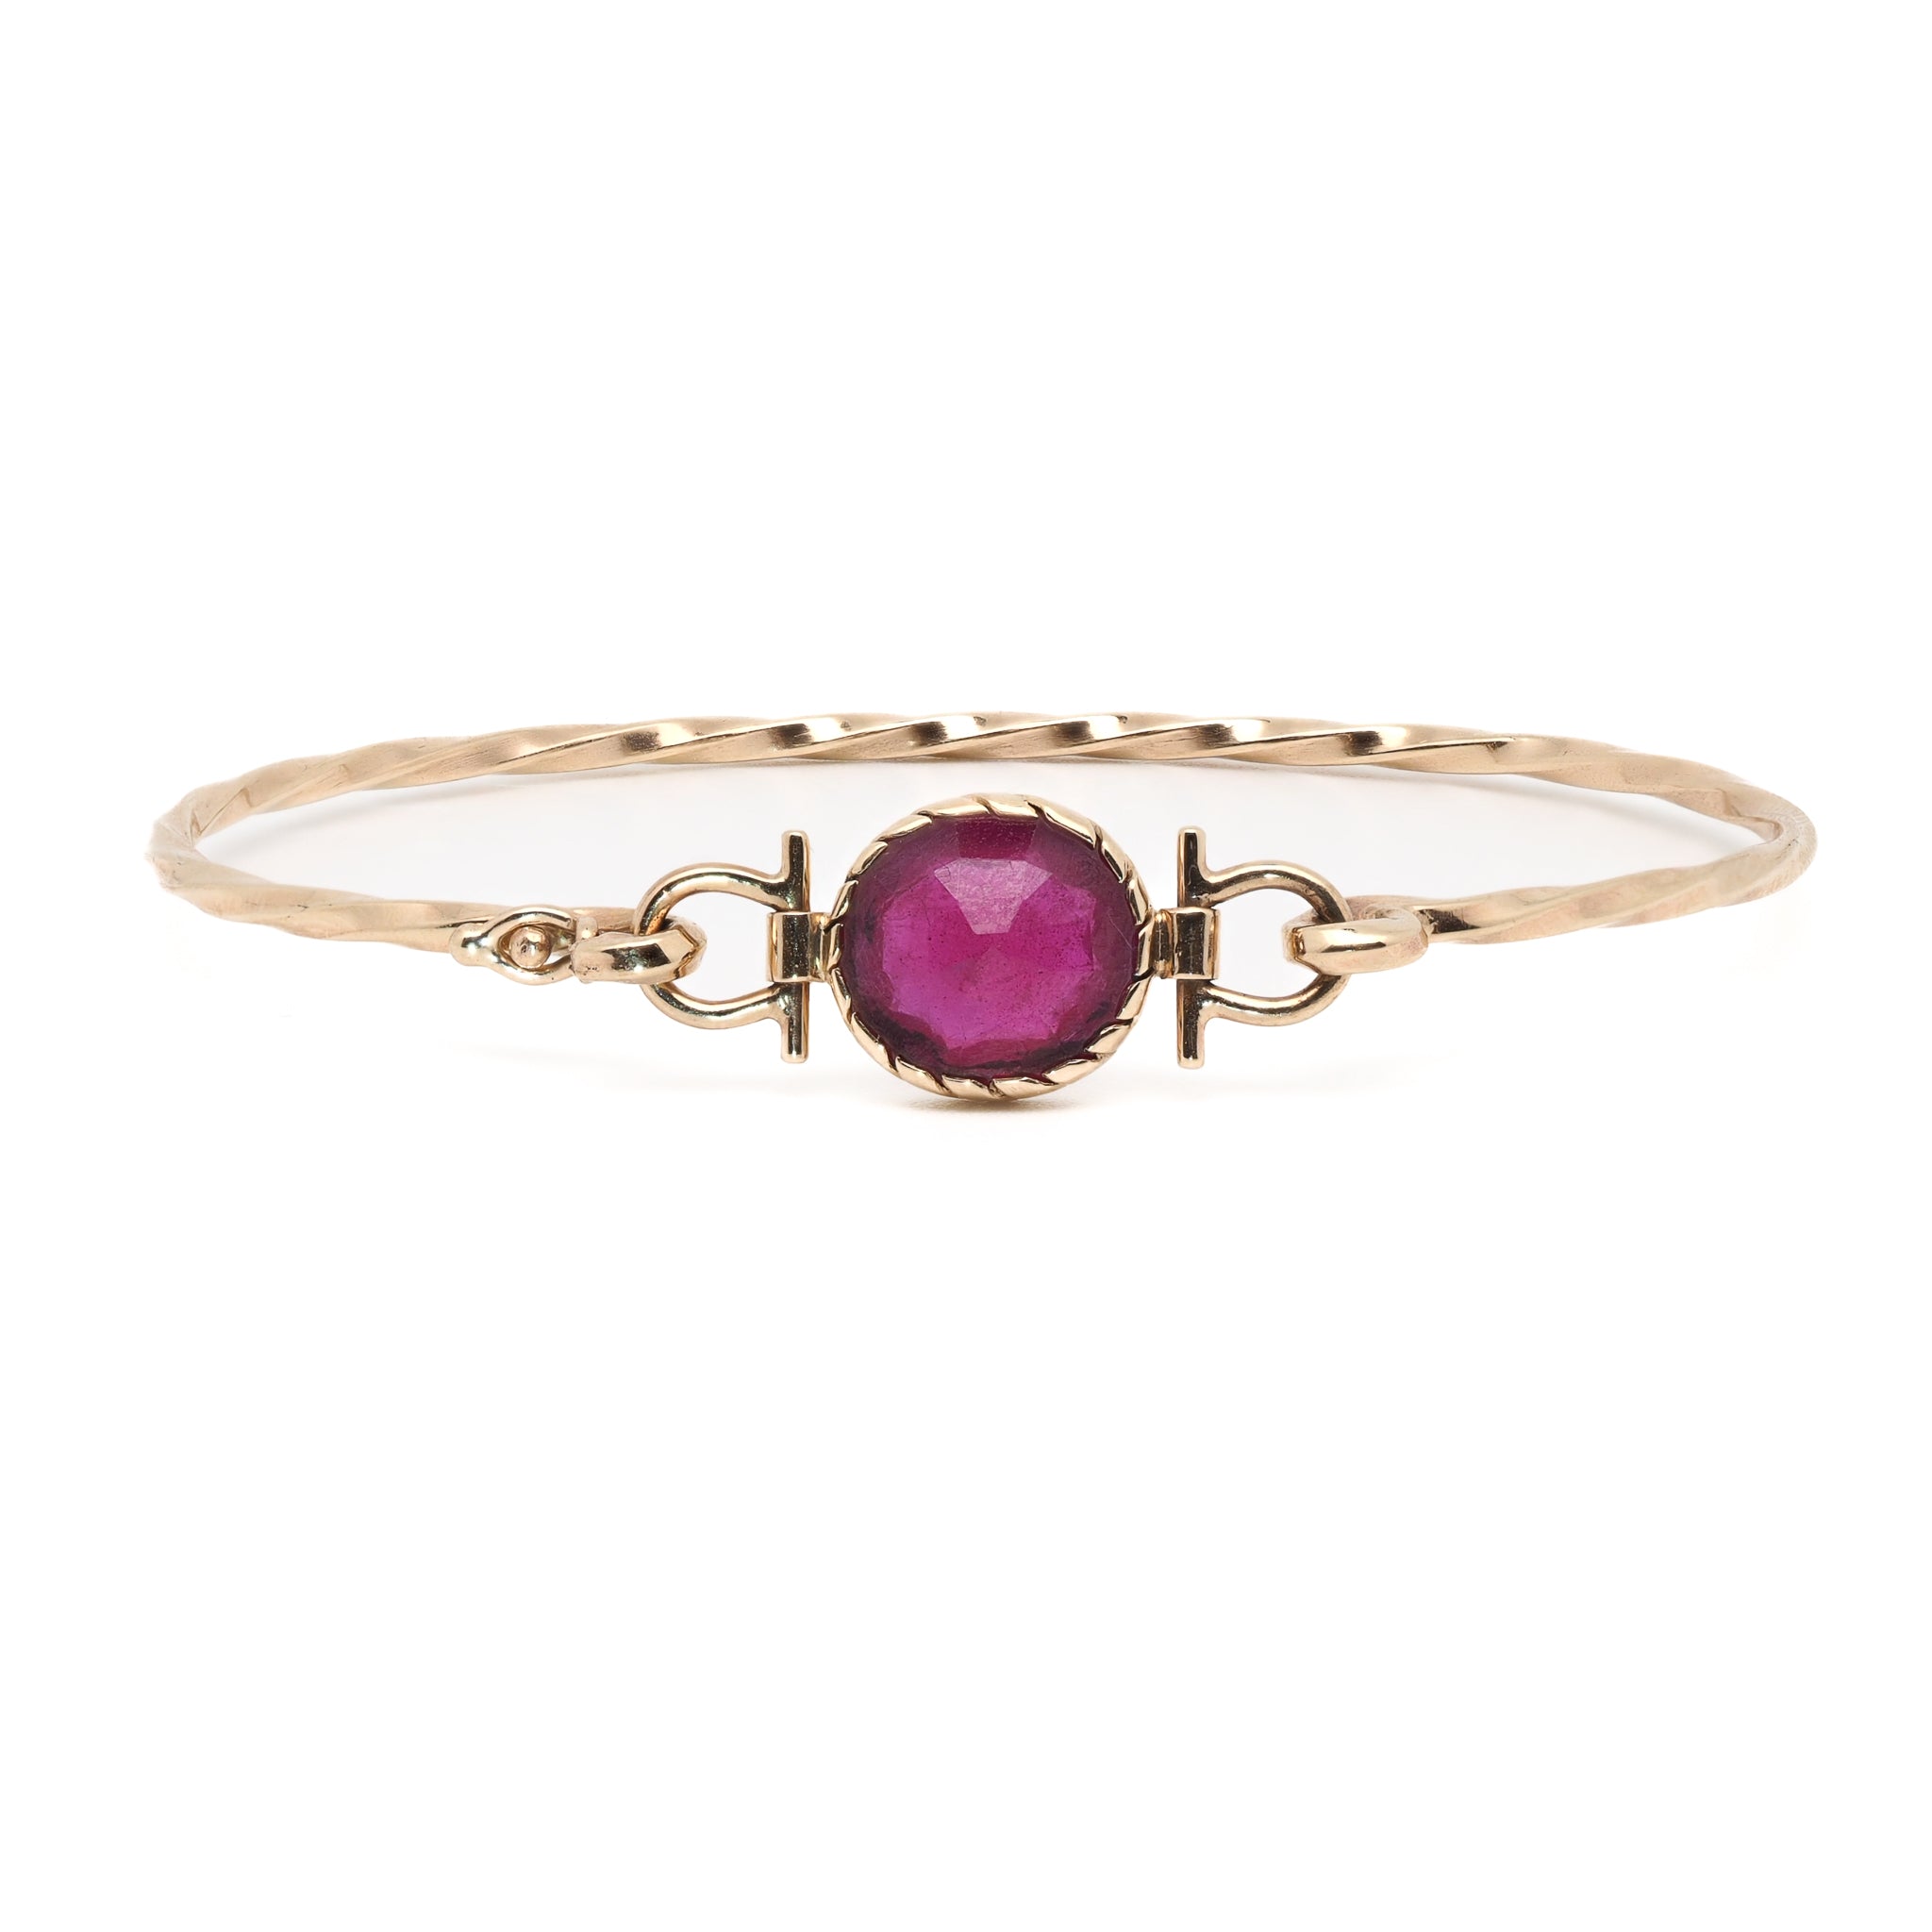 Gold Ruby Bangle Bracelet - A close-up view of the exquisite Gold Ruby Bangle Bracelet, showcasing the stunning natural Ruby gemstone.